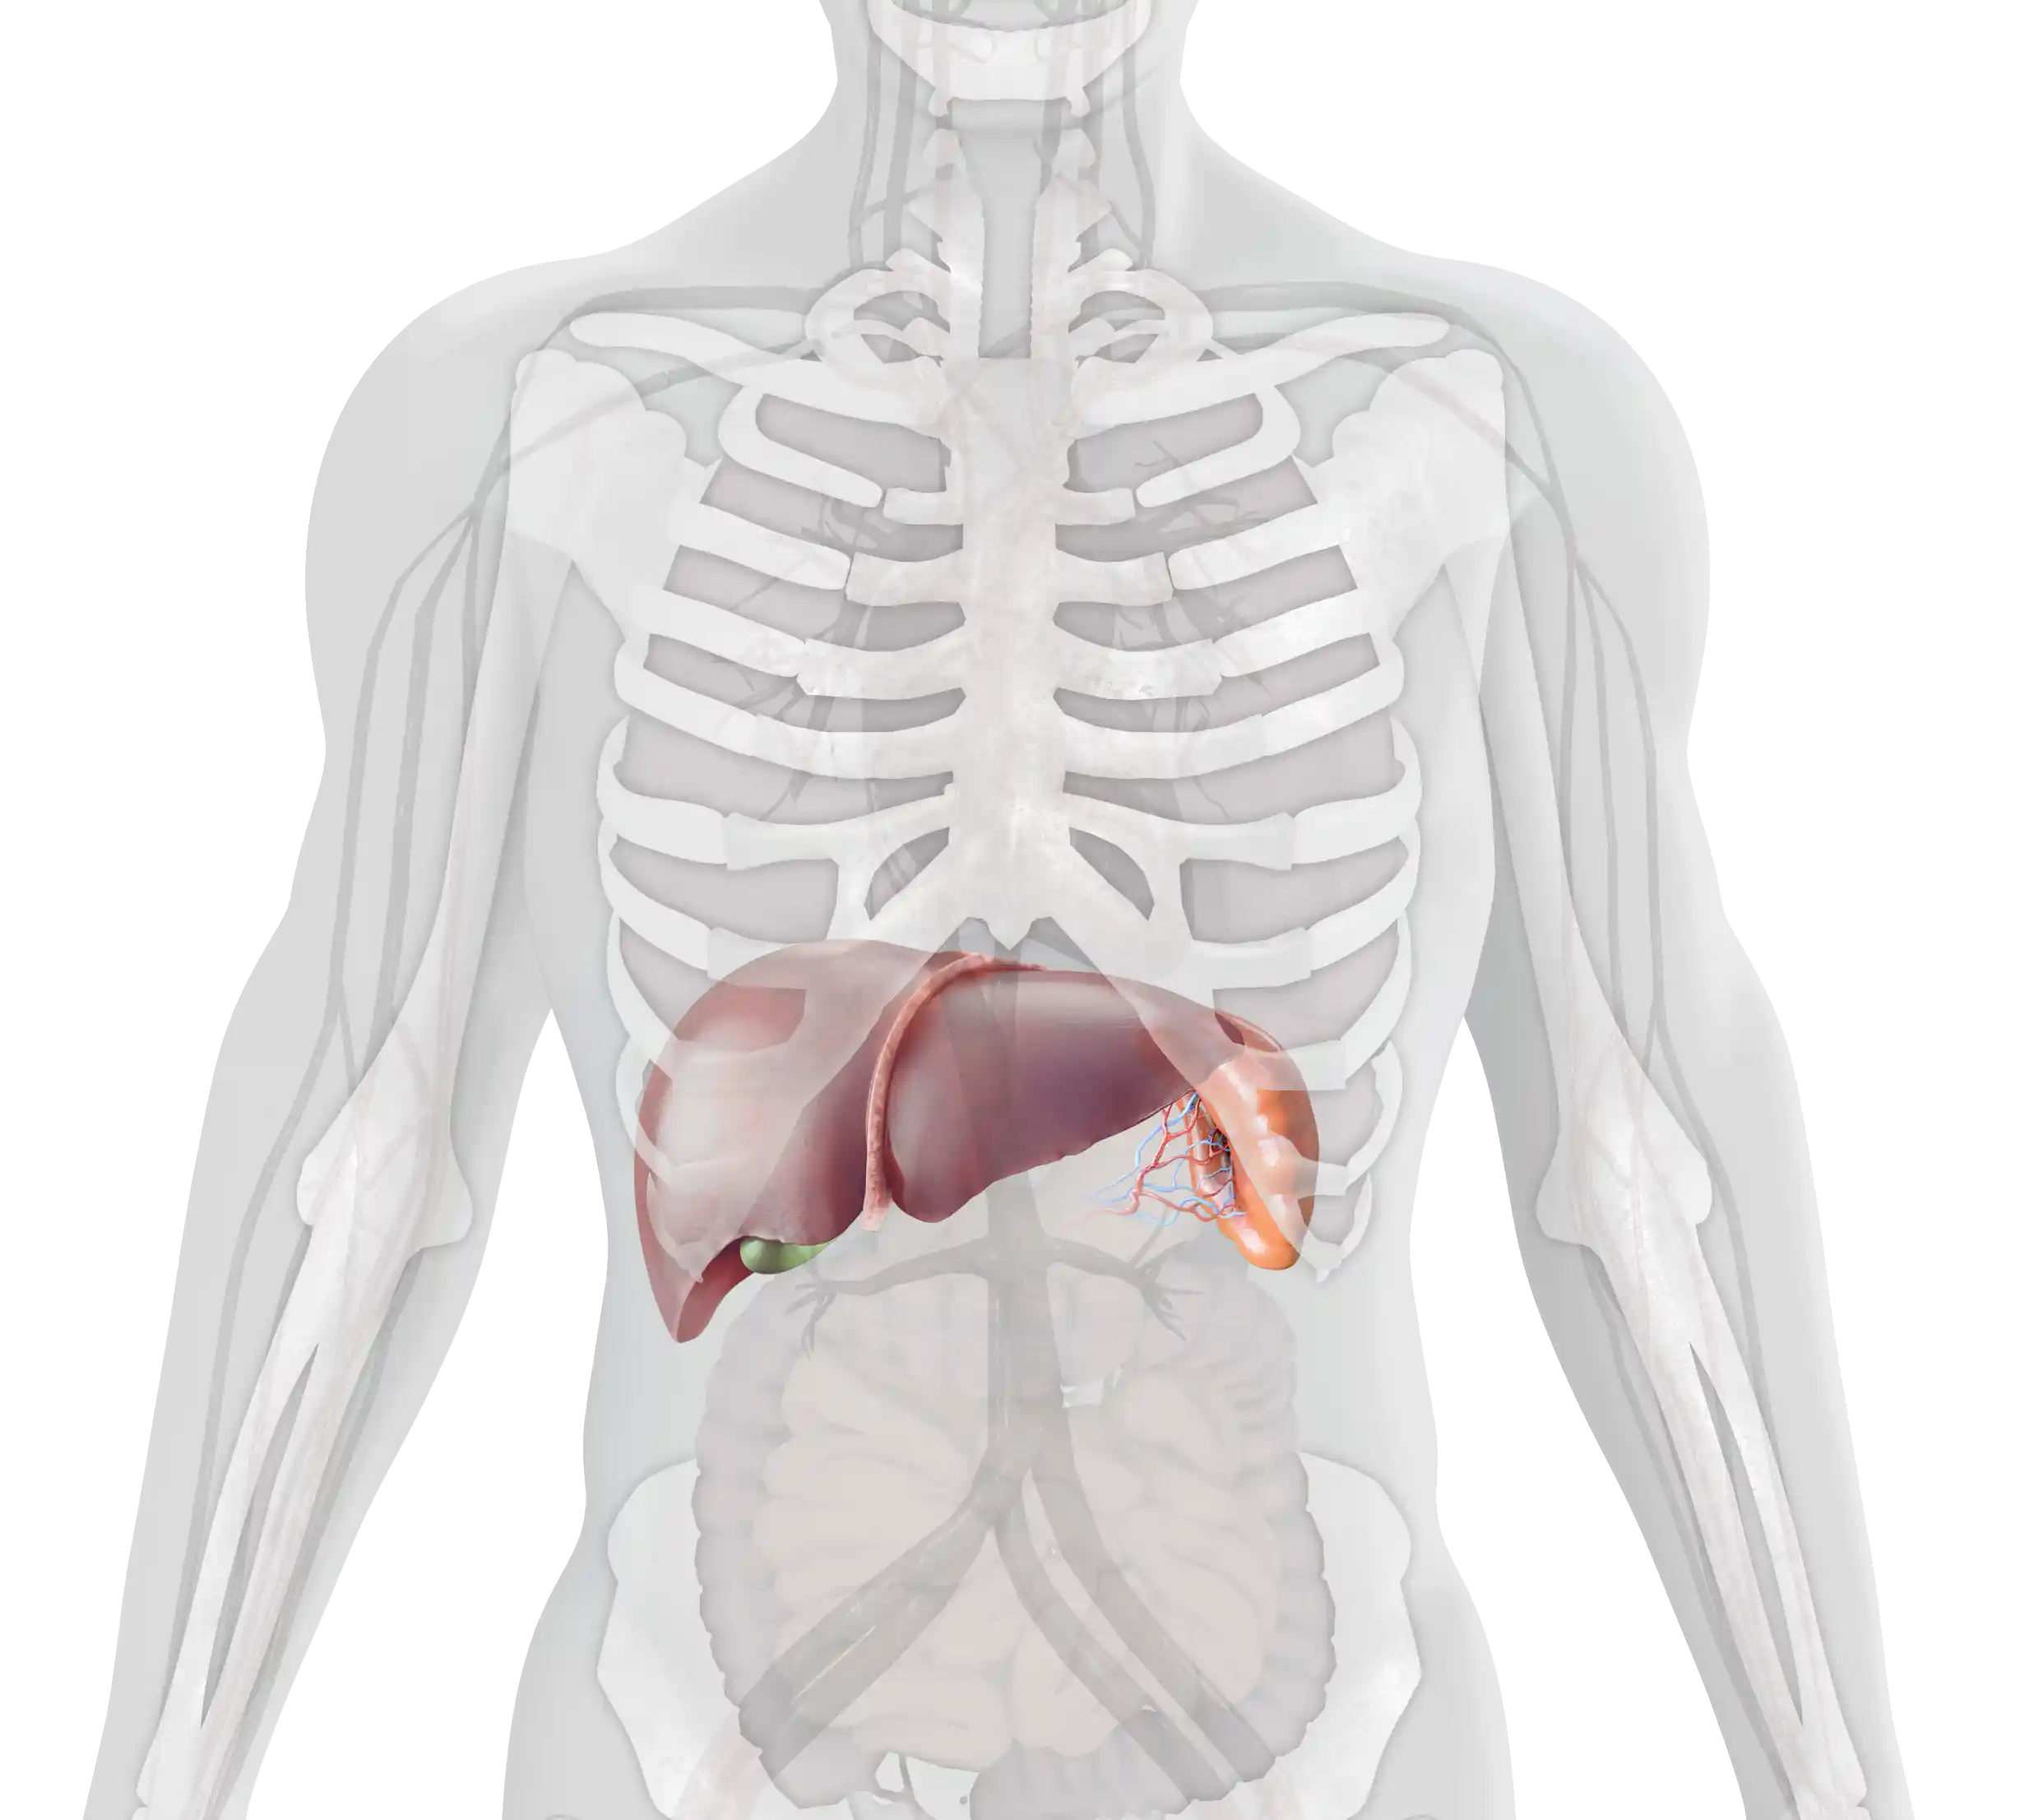 Image showing impacted organs and body parts